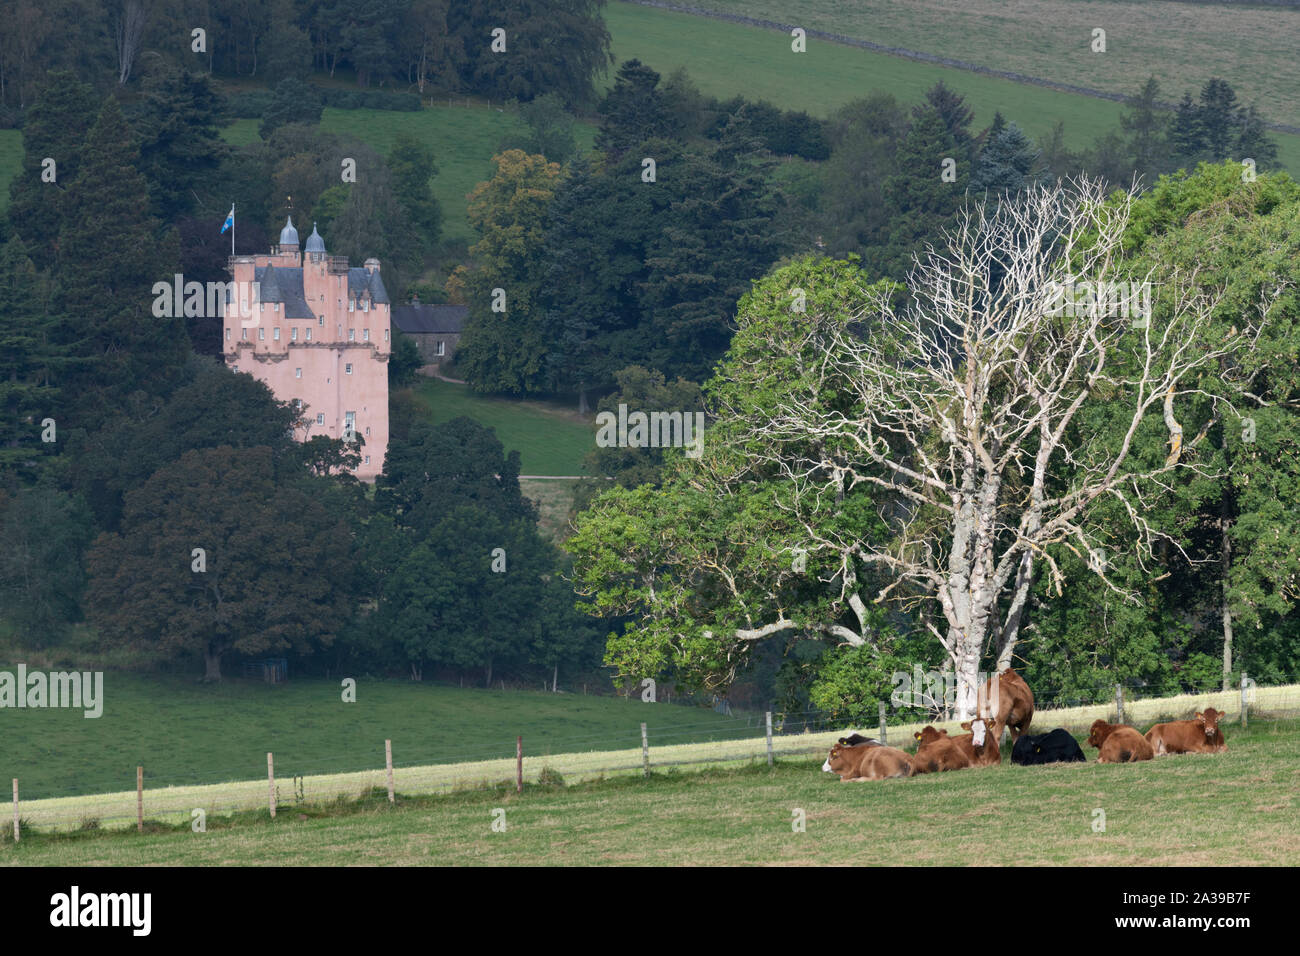 A Small Herd of Cows Lying Together in a Field in Sunshine with Craigievar Castle in the Background on a Wooded Hillside in Shade Stock Photo